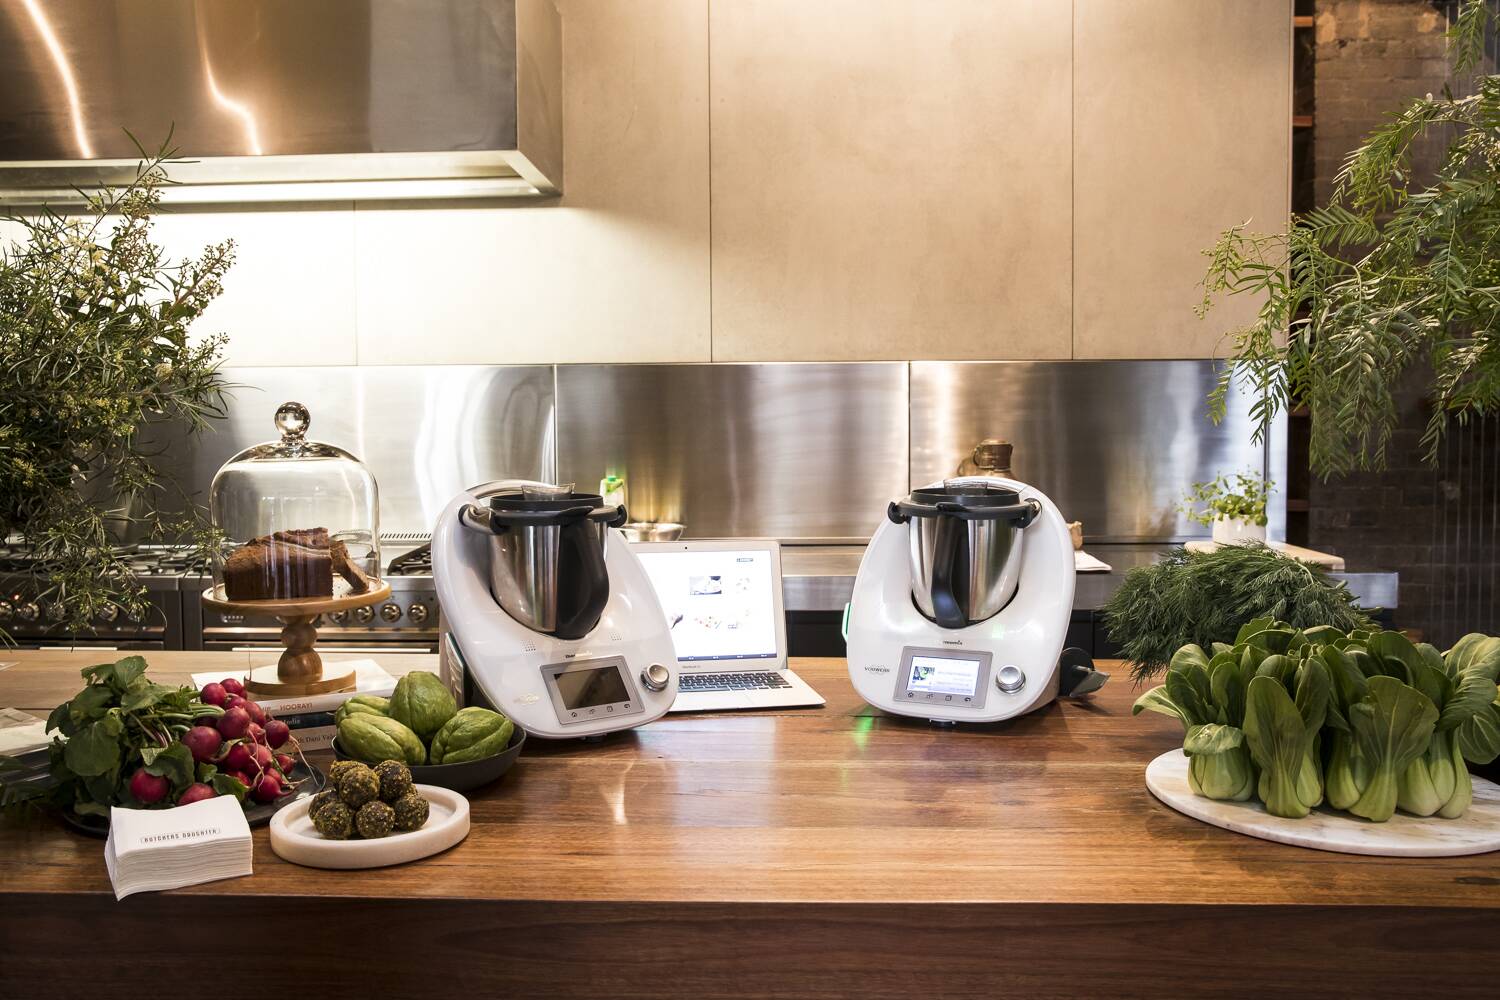 Thermomix in Australia - Do you have an older model Thermomix® and have  been thinking about upgrading to a TM6? Soon you'll be able to trade-in and  Trade-Up your TM31 to a